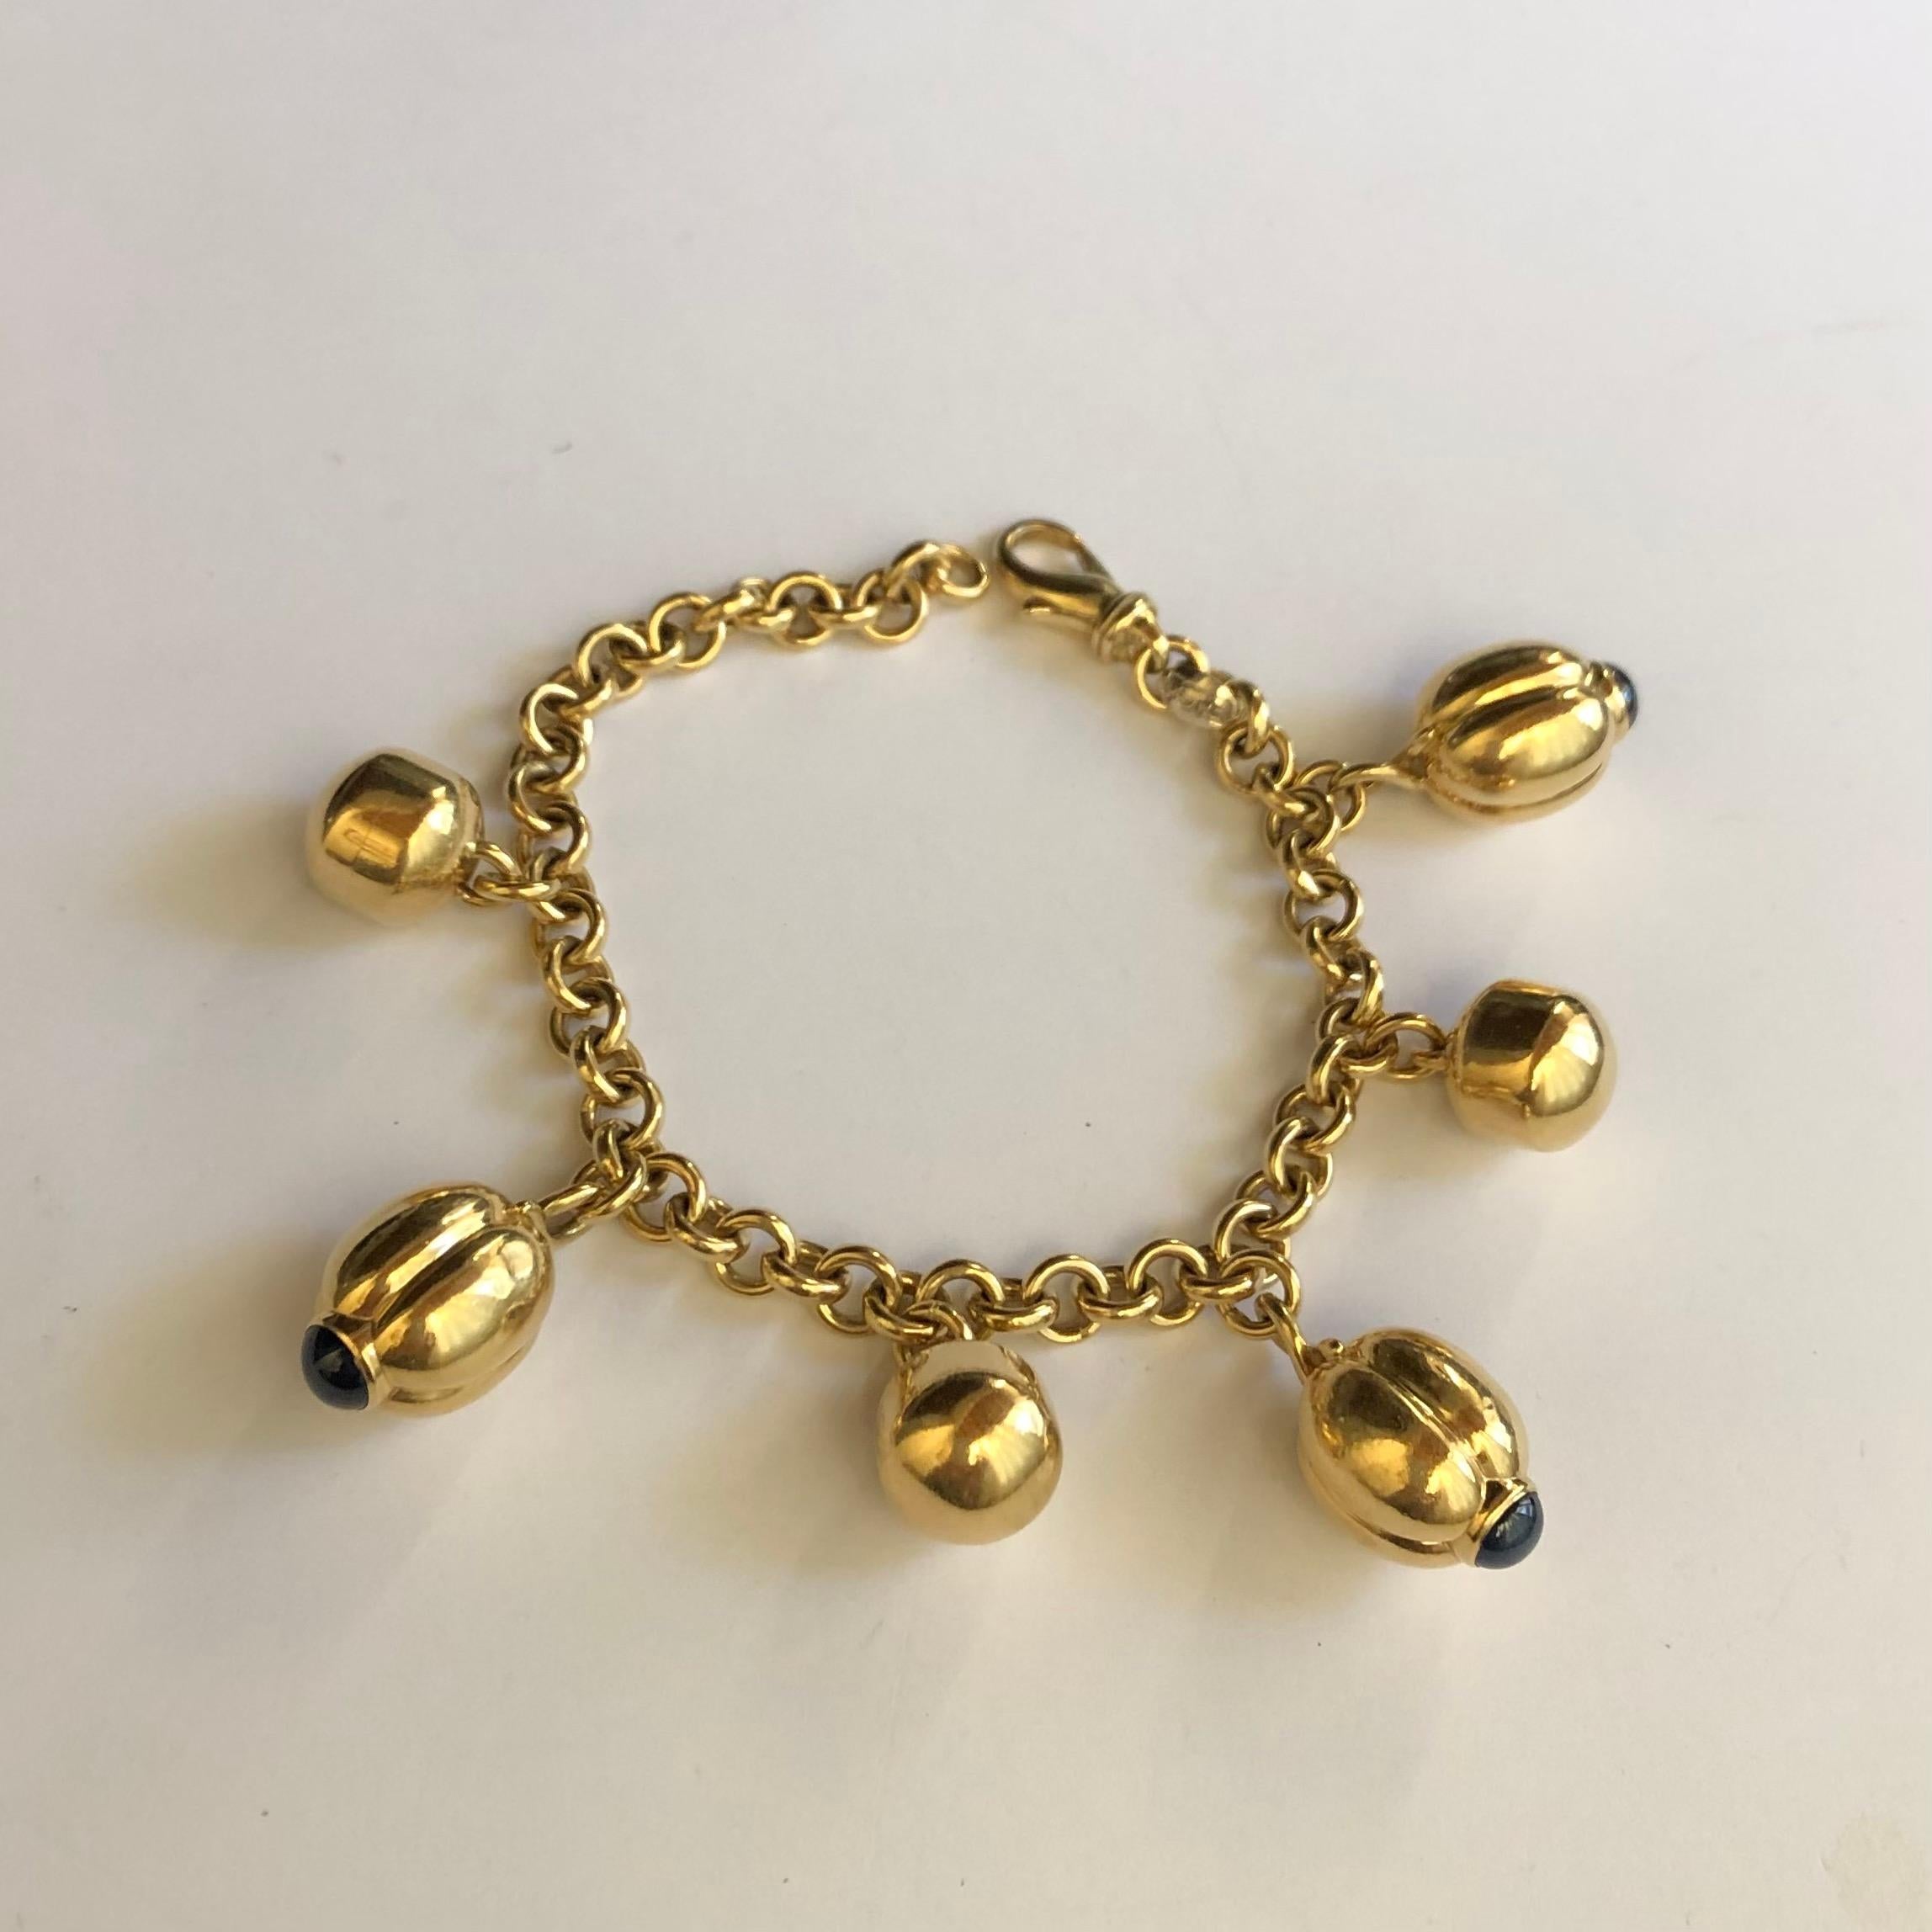 Original 18kt yellow gold with cabochon sapphires FOPE bracelet. 
Six charms in 18kt yellow gold and three of them with cabochon sapphires. Made in Italy. 750 stamp. FOPE logo and manufacturer's stamp: 303 VI ( Vicenza - Italy)
The bracelet is made